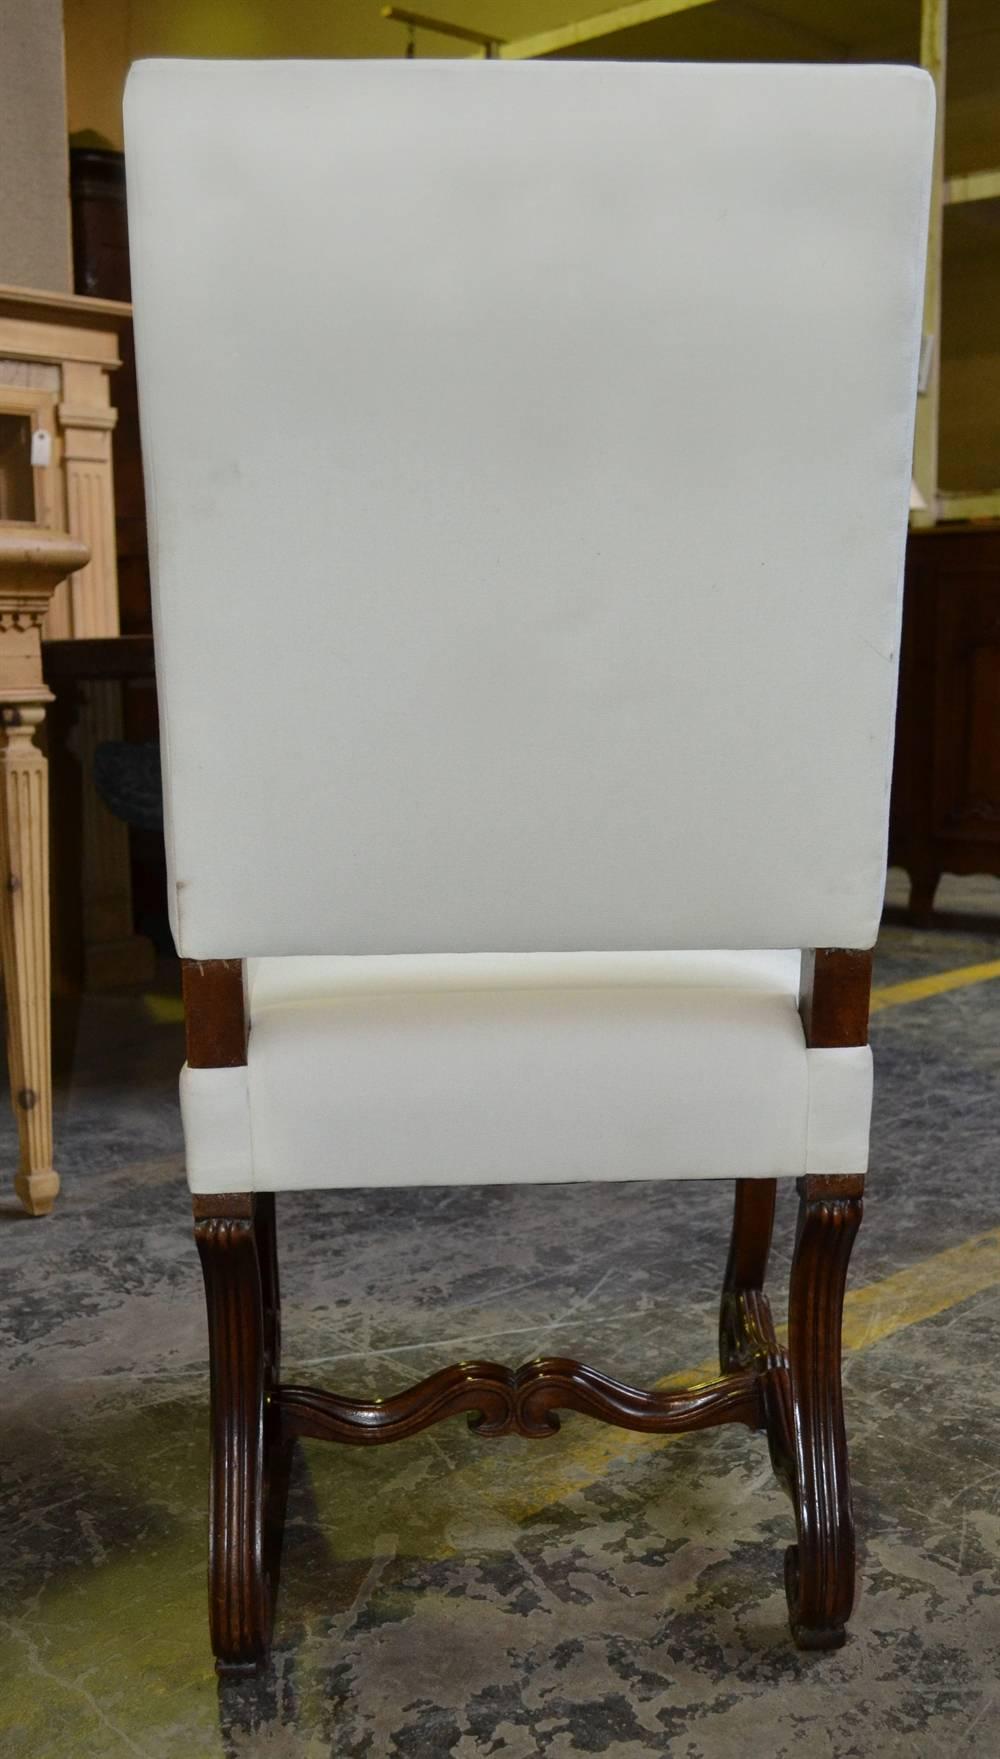 This stately chair is an antique piece of wonderful quality. It is enhanced by its elaborate base and its imposing height.